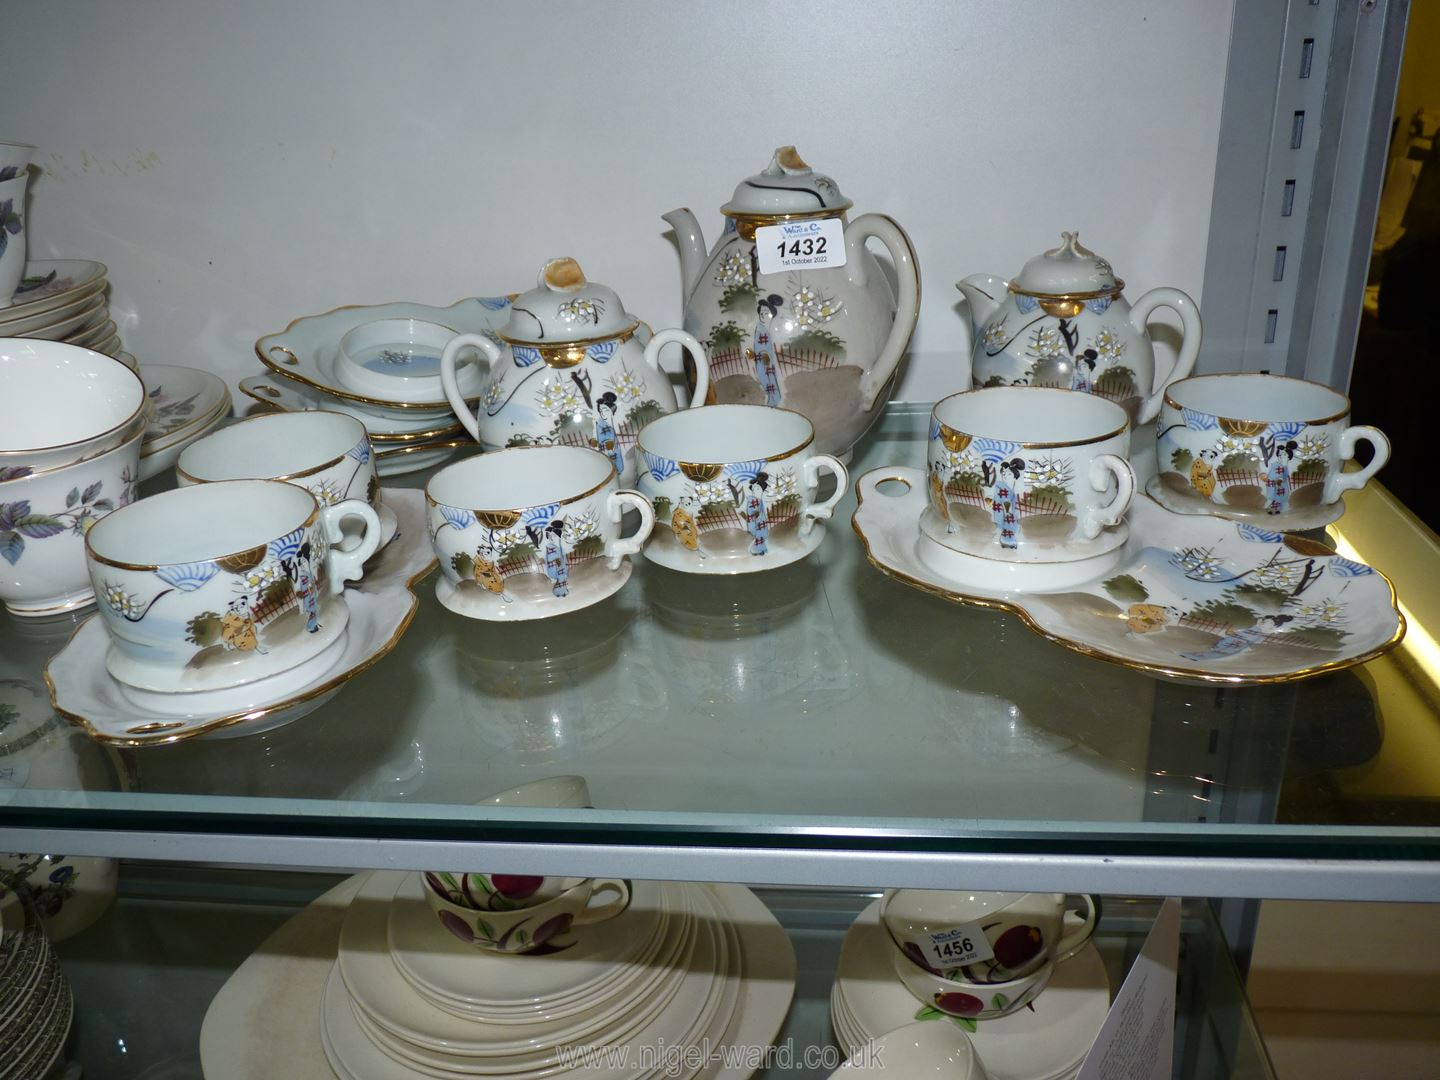 An oriental Teaset with six cups and five saucers, small teapot, sugar bowl and lidded milk jug.